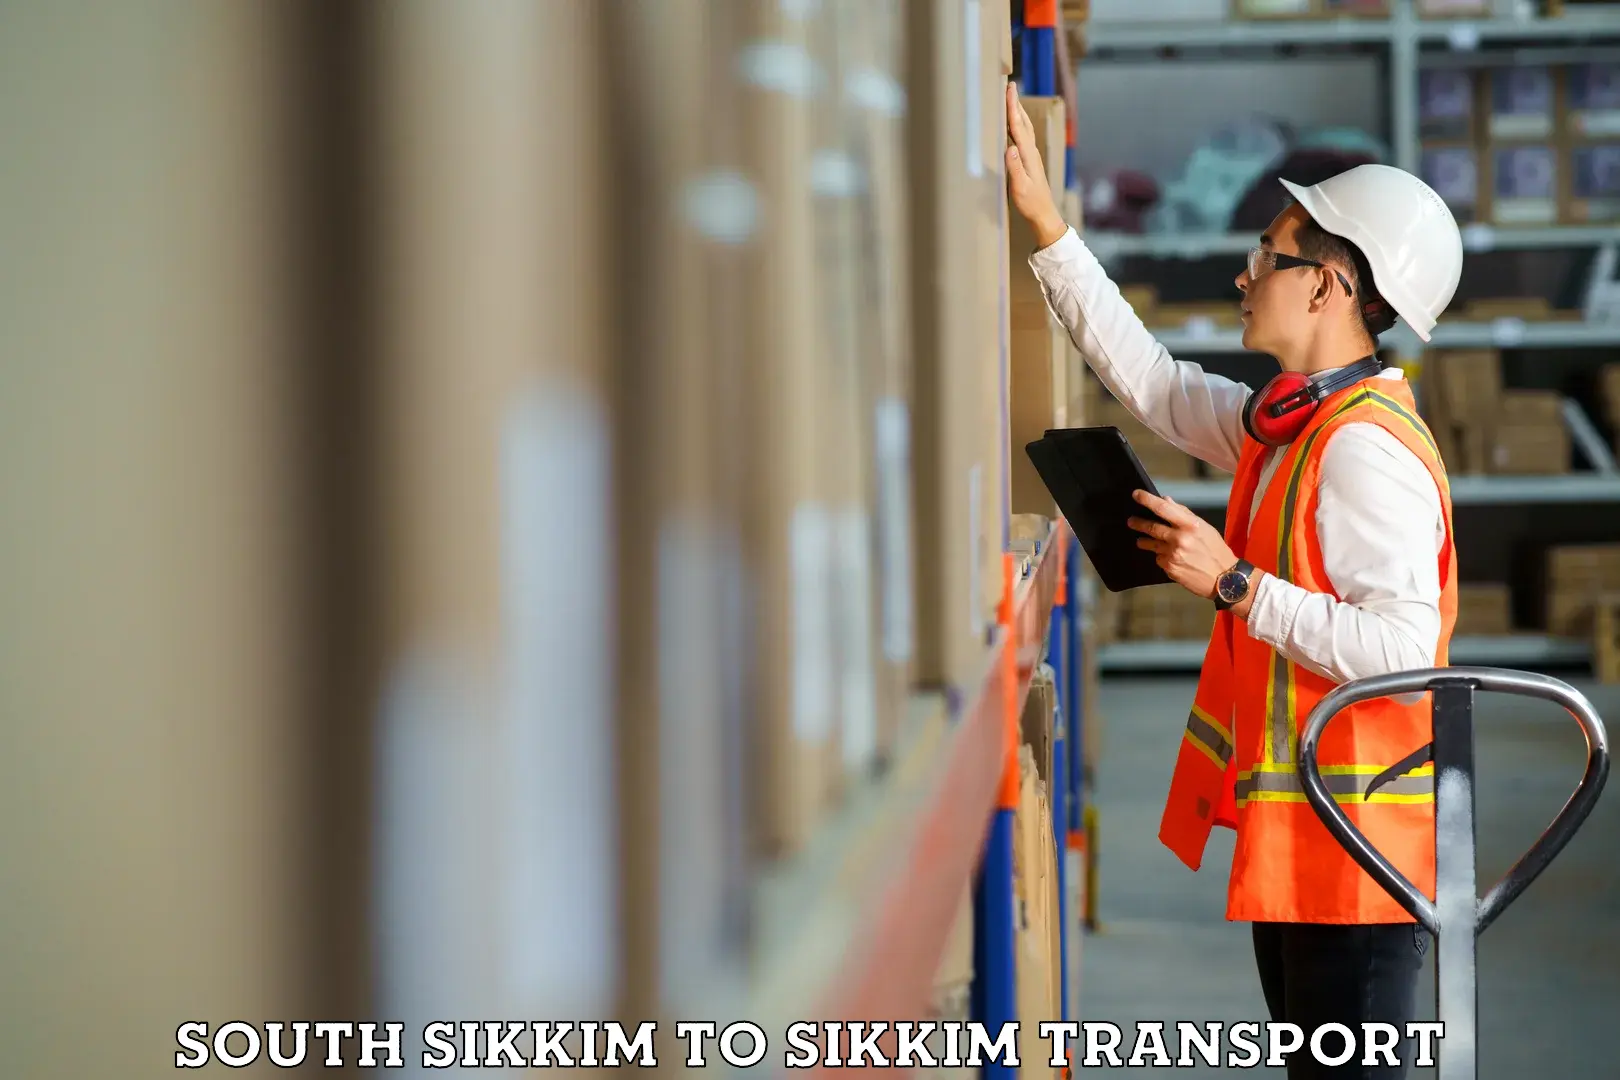 Shipping partner South Sikkim to North Sikkim